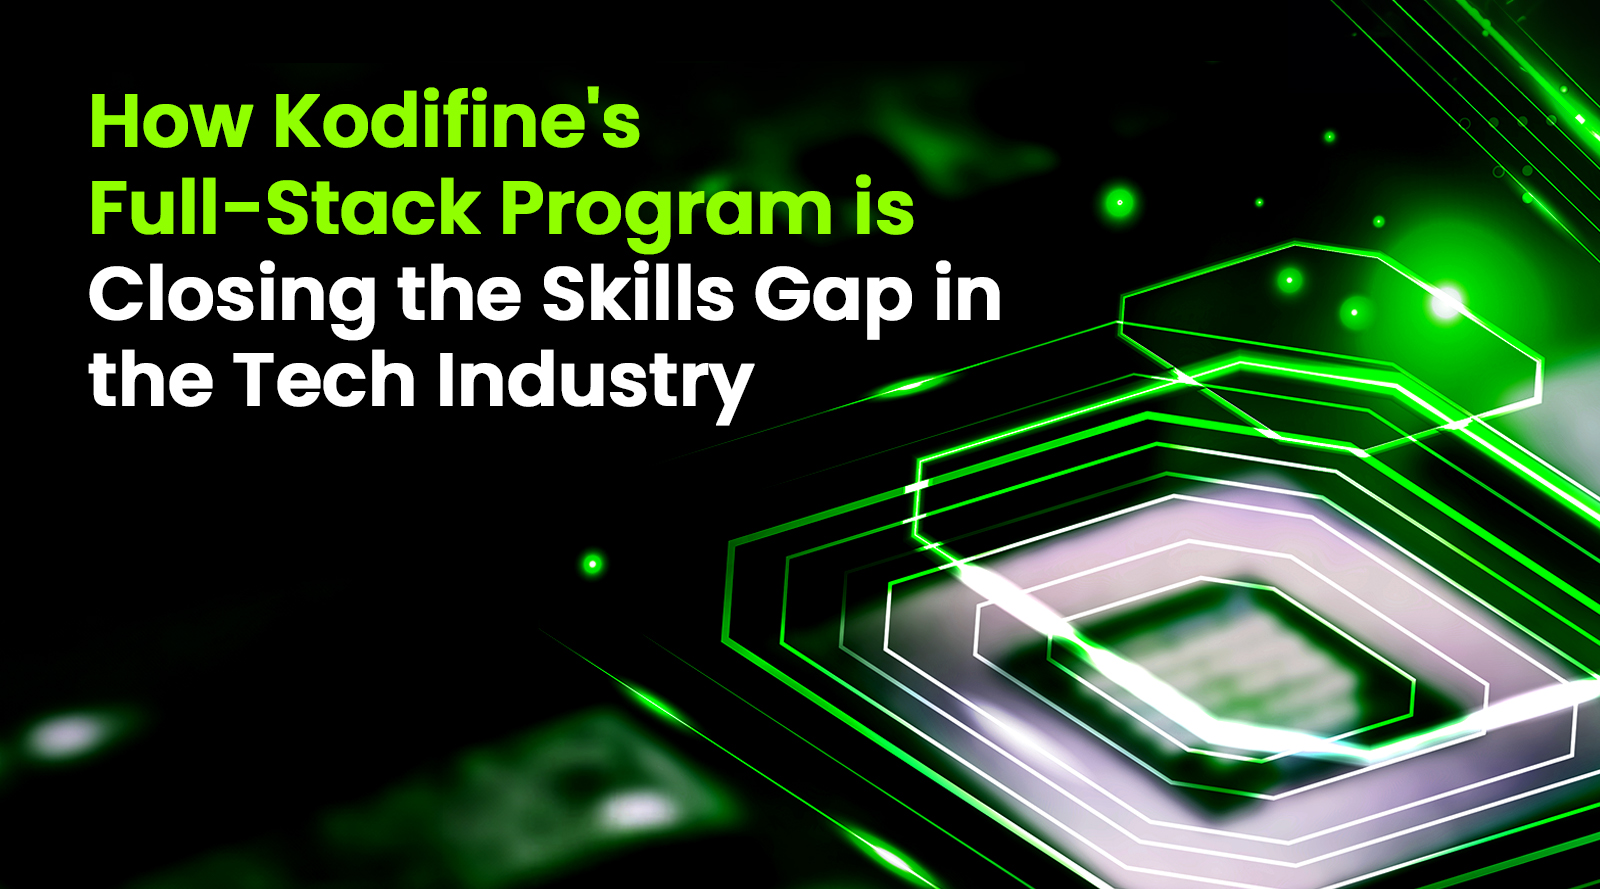 How Kodifine’s Full-Stack Program is Bridging the Skills Gap in the Tech Industry